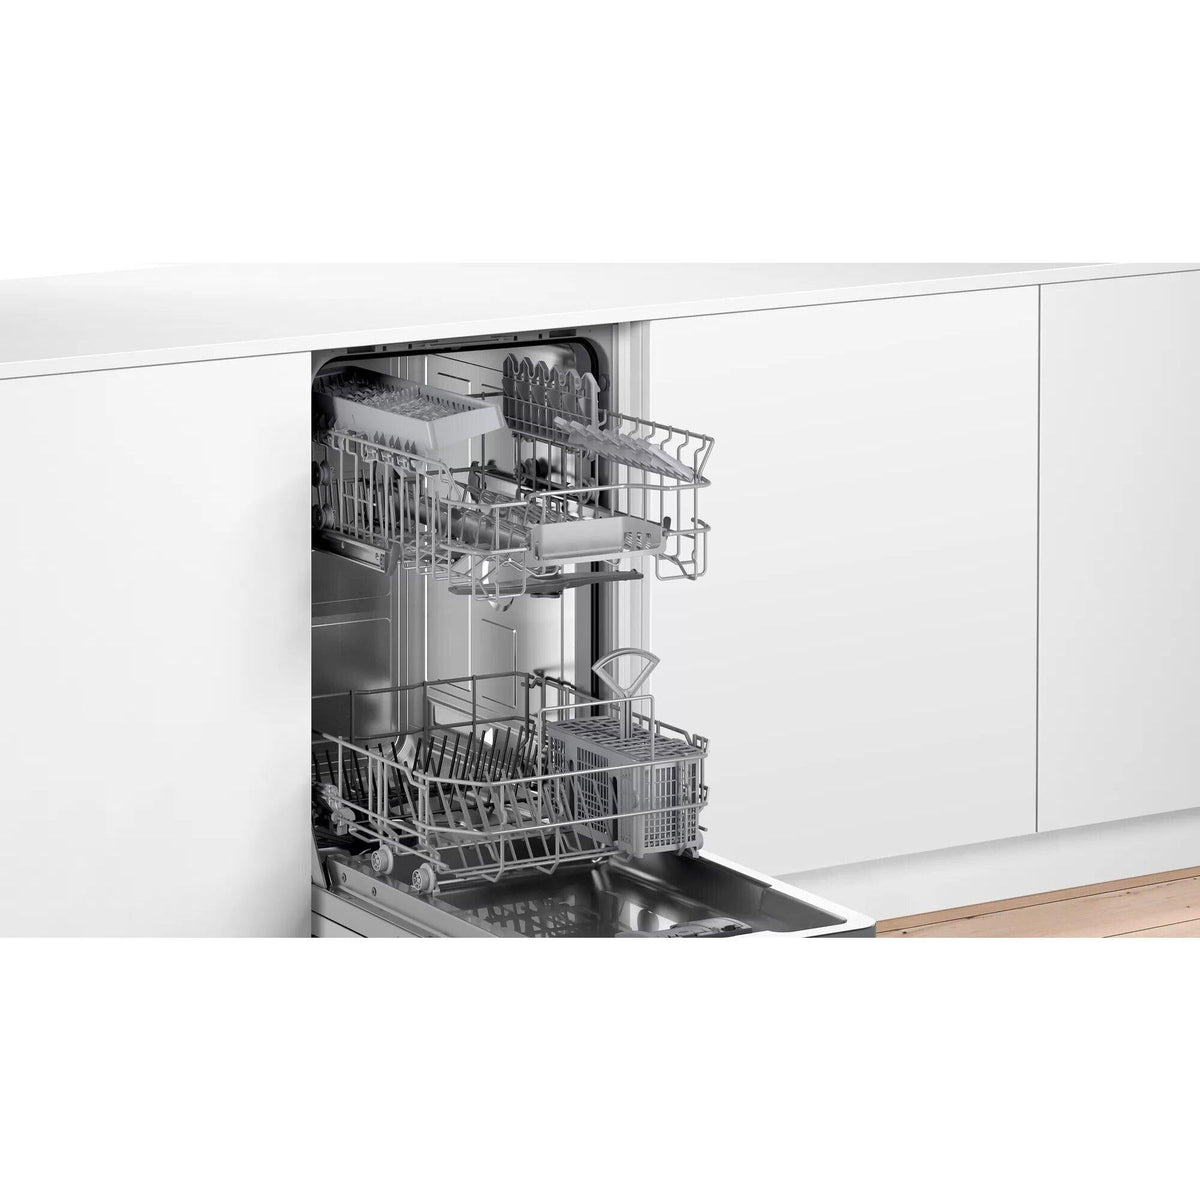 Bosch 45CM Serie 2 Fully Integrated Slimline Dishwasher - White | SPV2HKX39G from DID Electrical - guaranteed Irish, guaranteed quality service. (6977495400636)